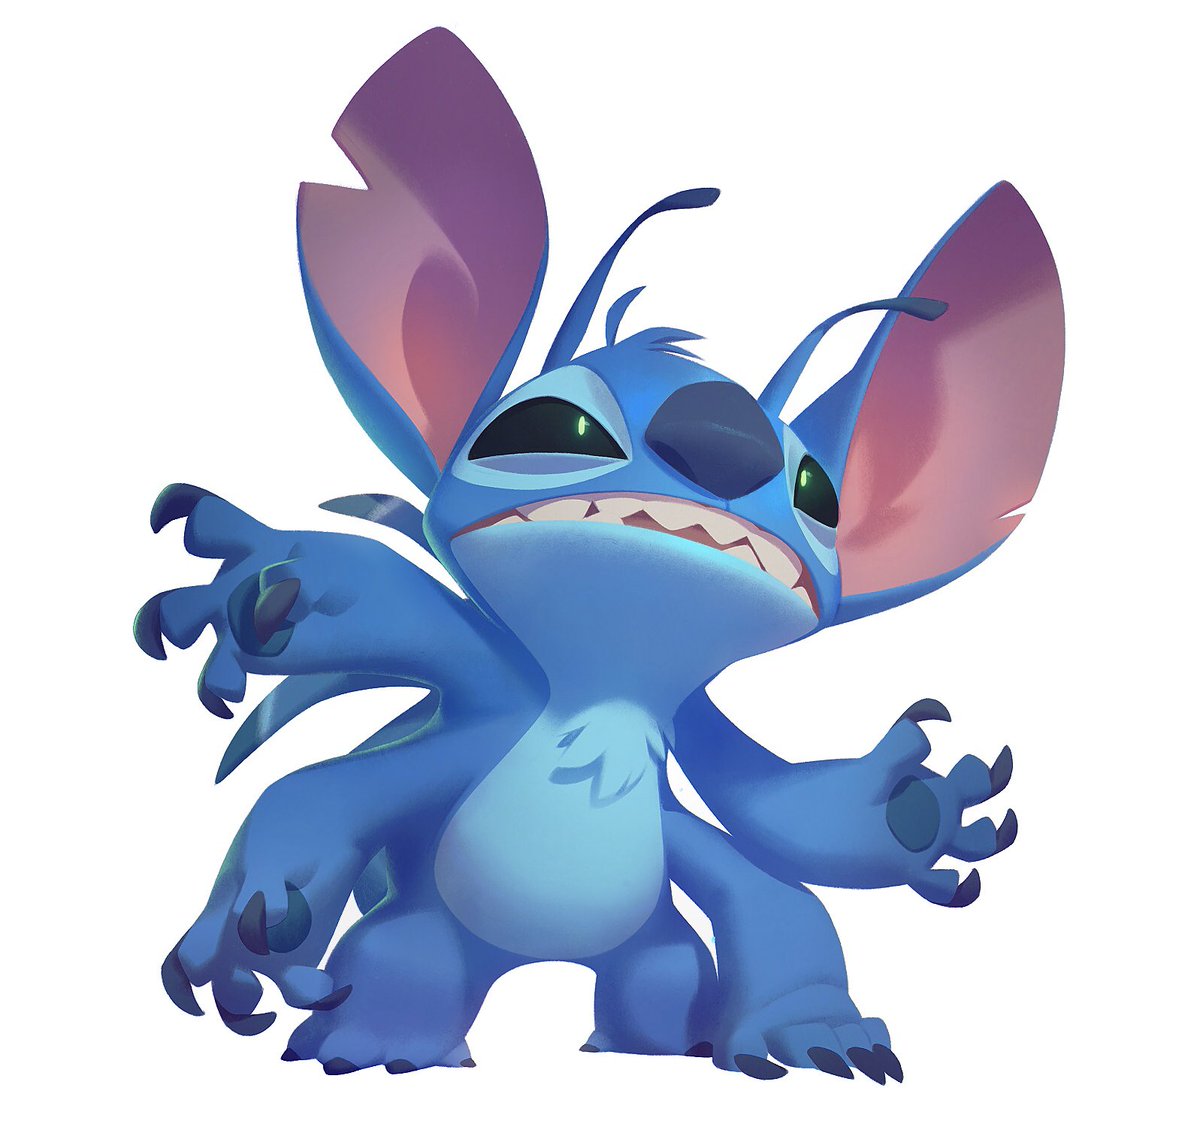 Spent some time tonight streaming and drawing Stitch, a great ethical hero of mine 